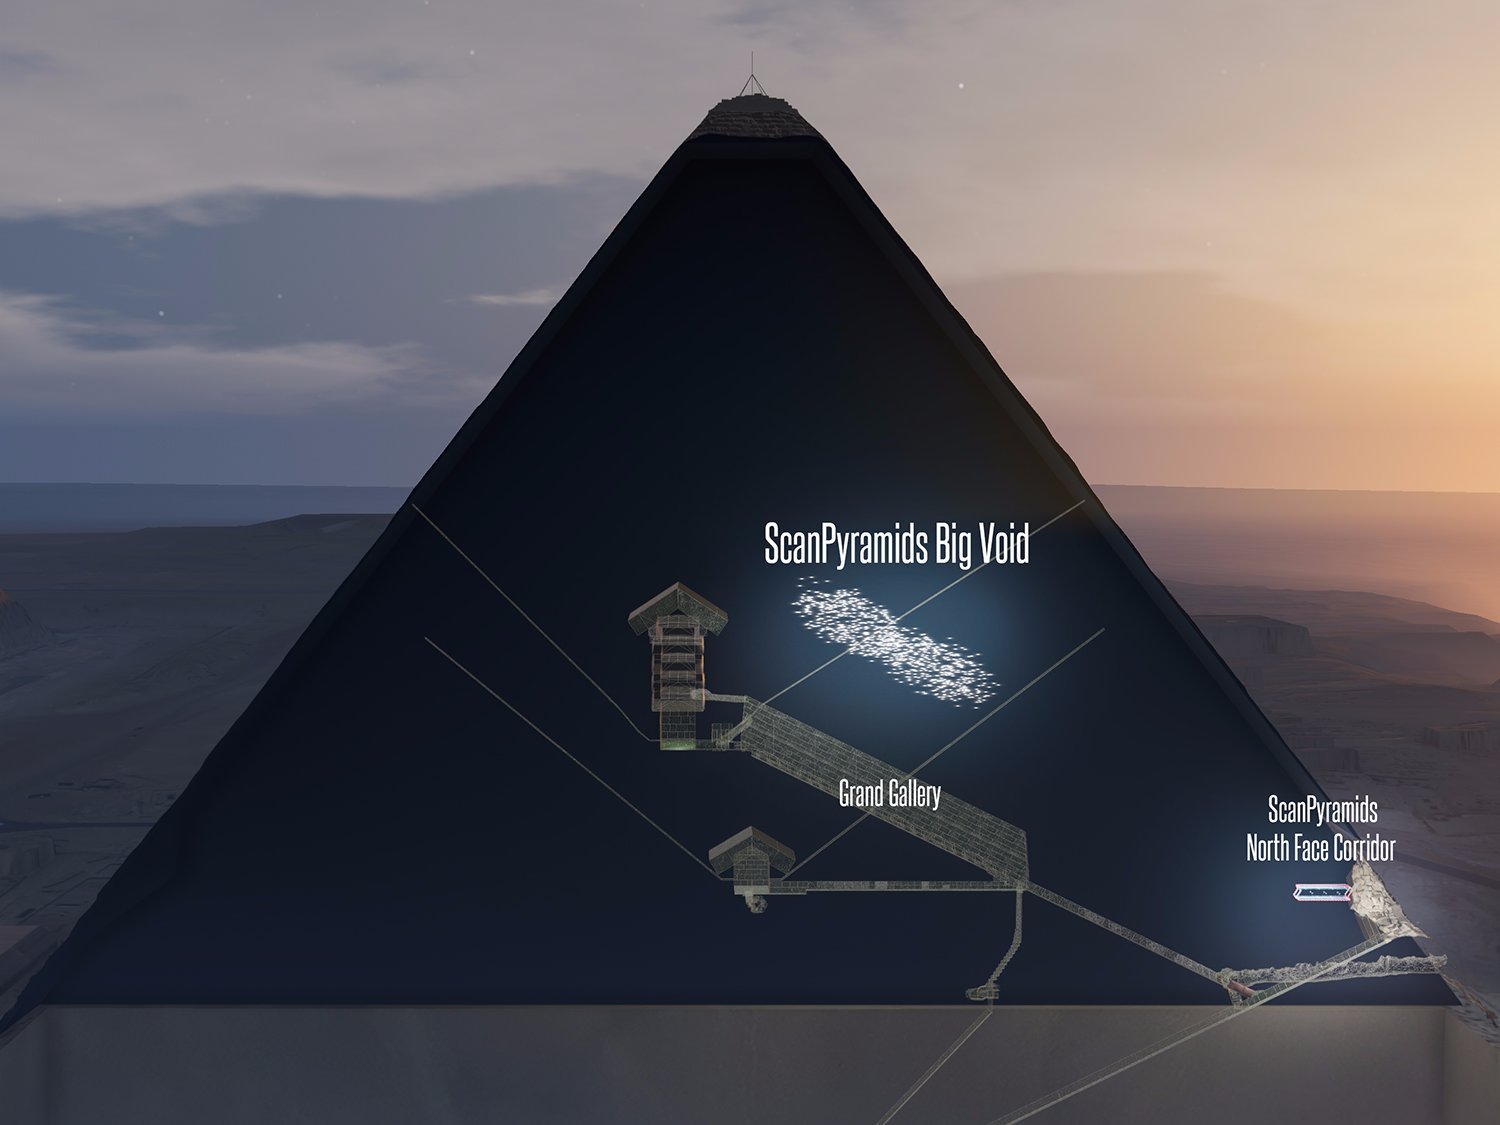 ScanPyramids-discovery - 10 of the most amazing archaeological discoveries made in 2017